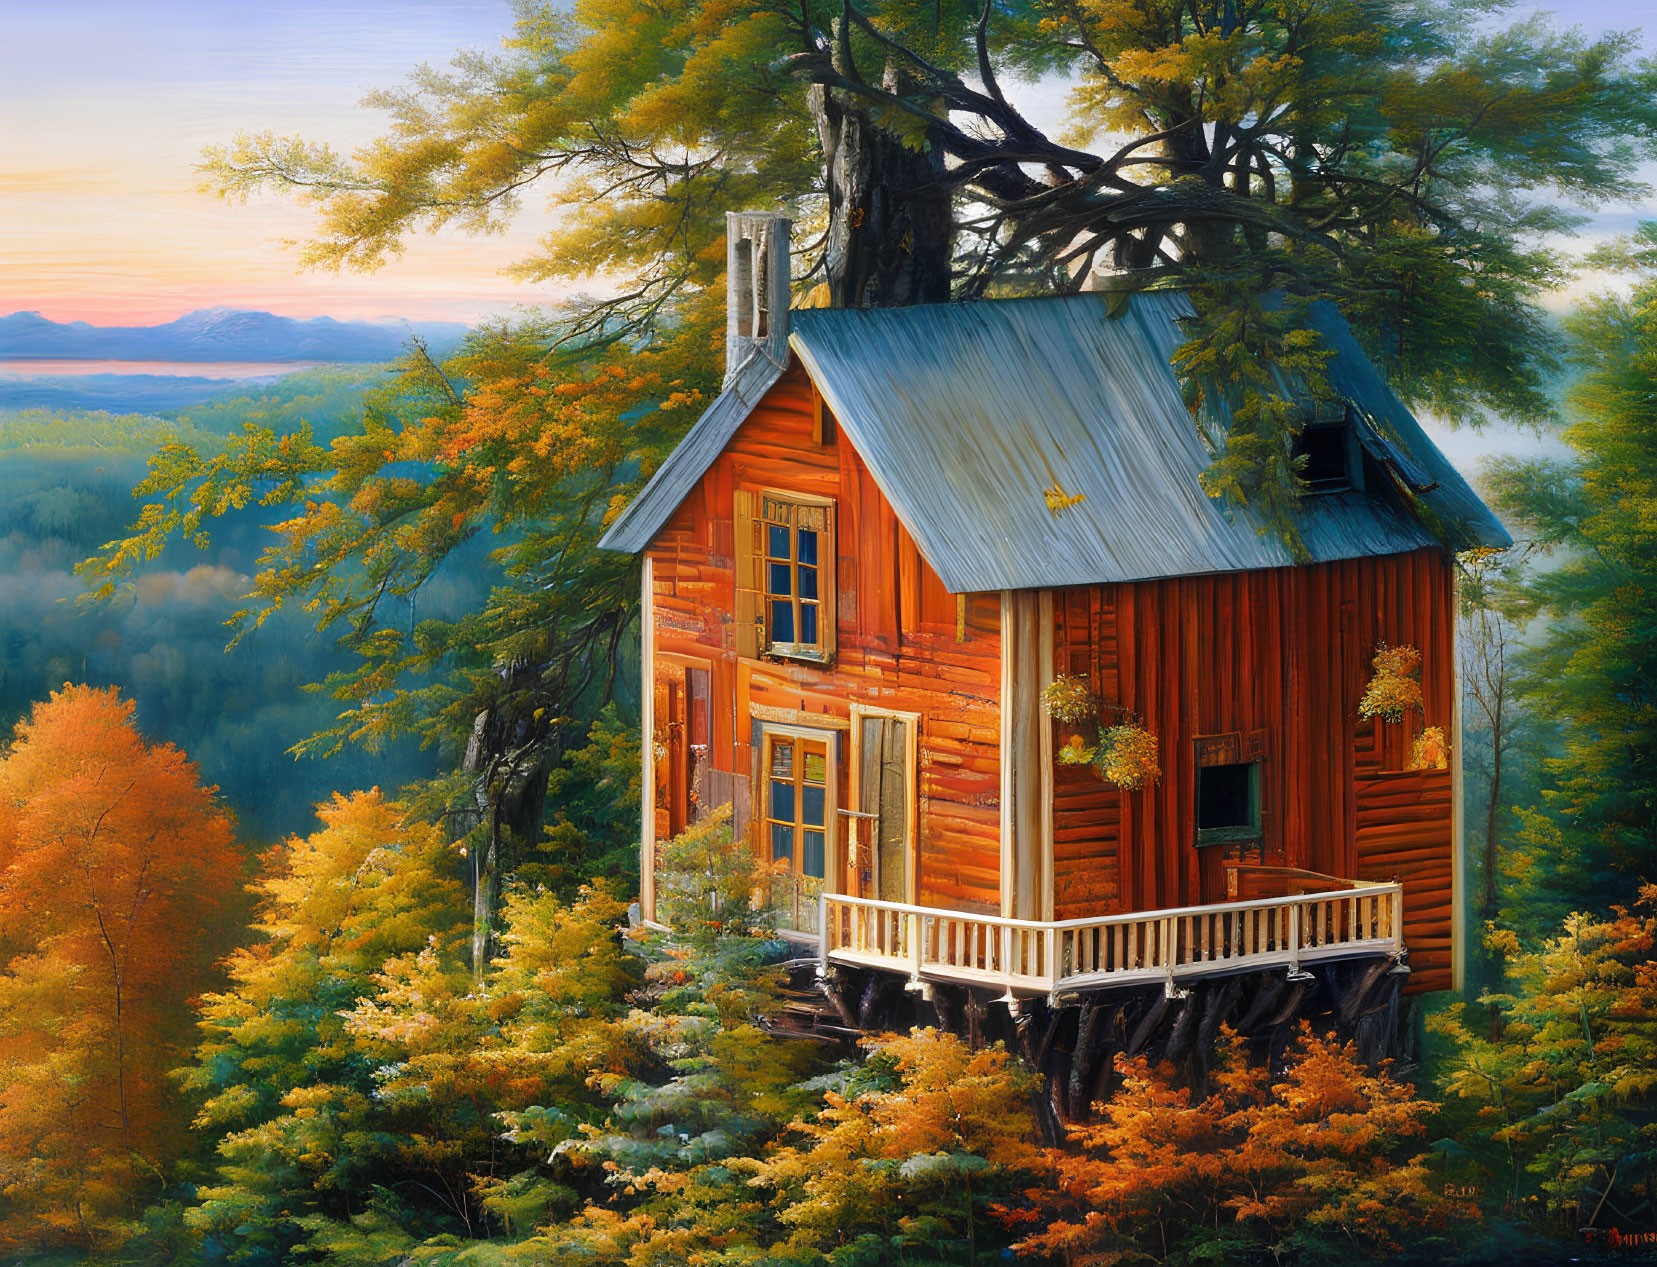 Cozy wooden cabin in autumn forest with mountain sunset